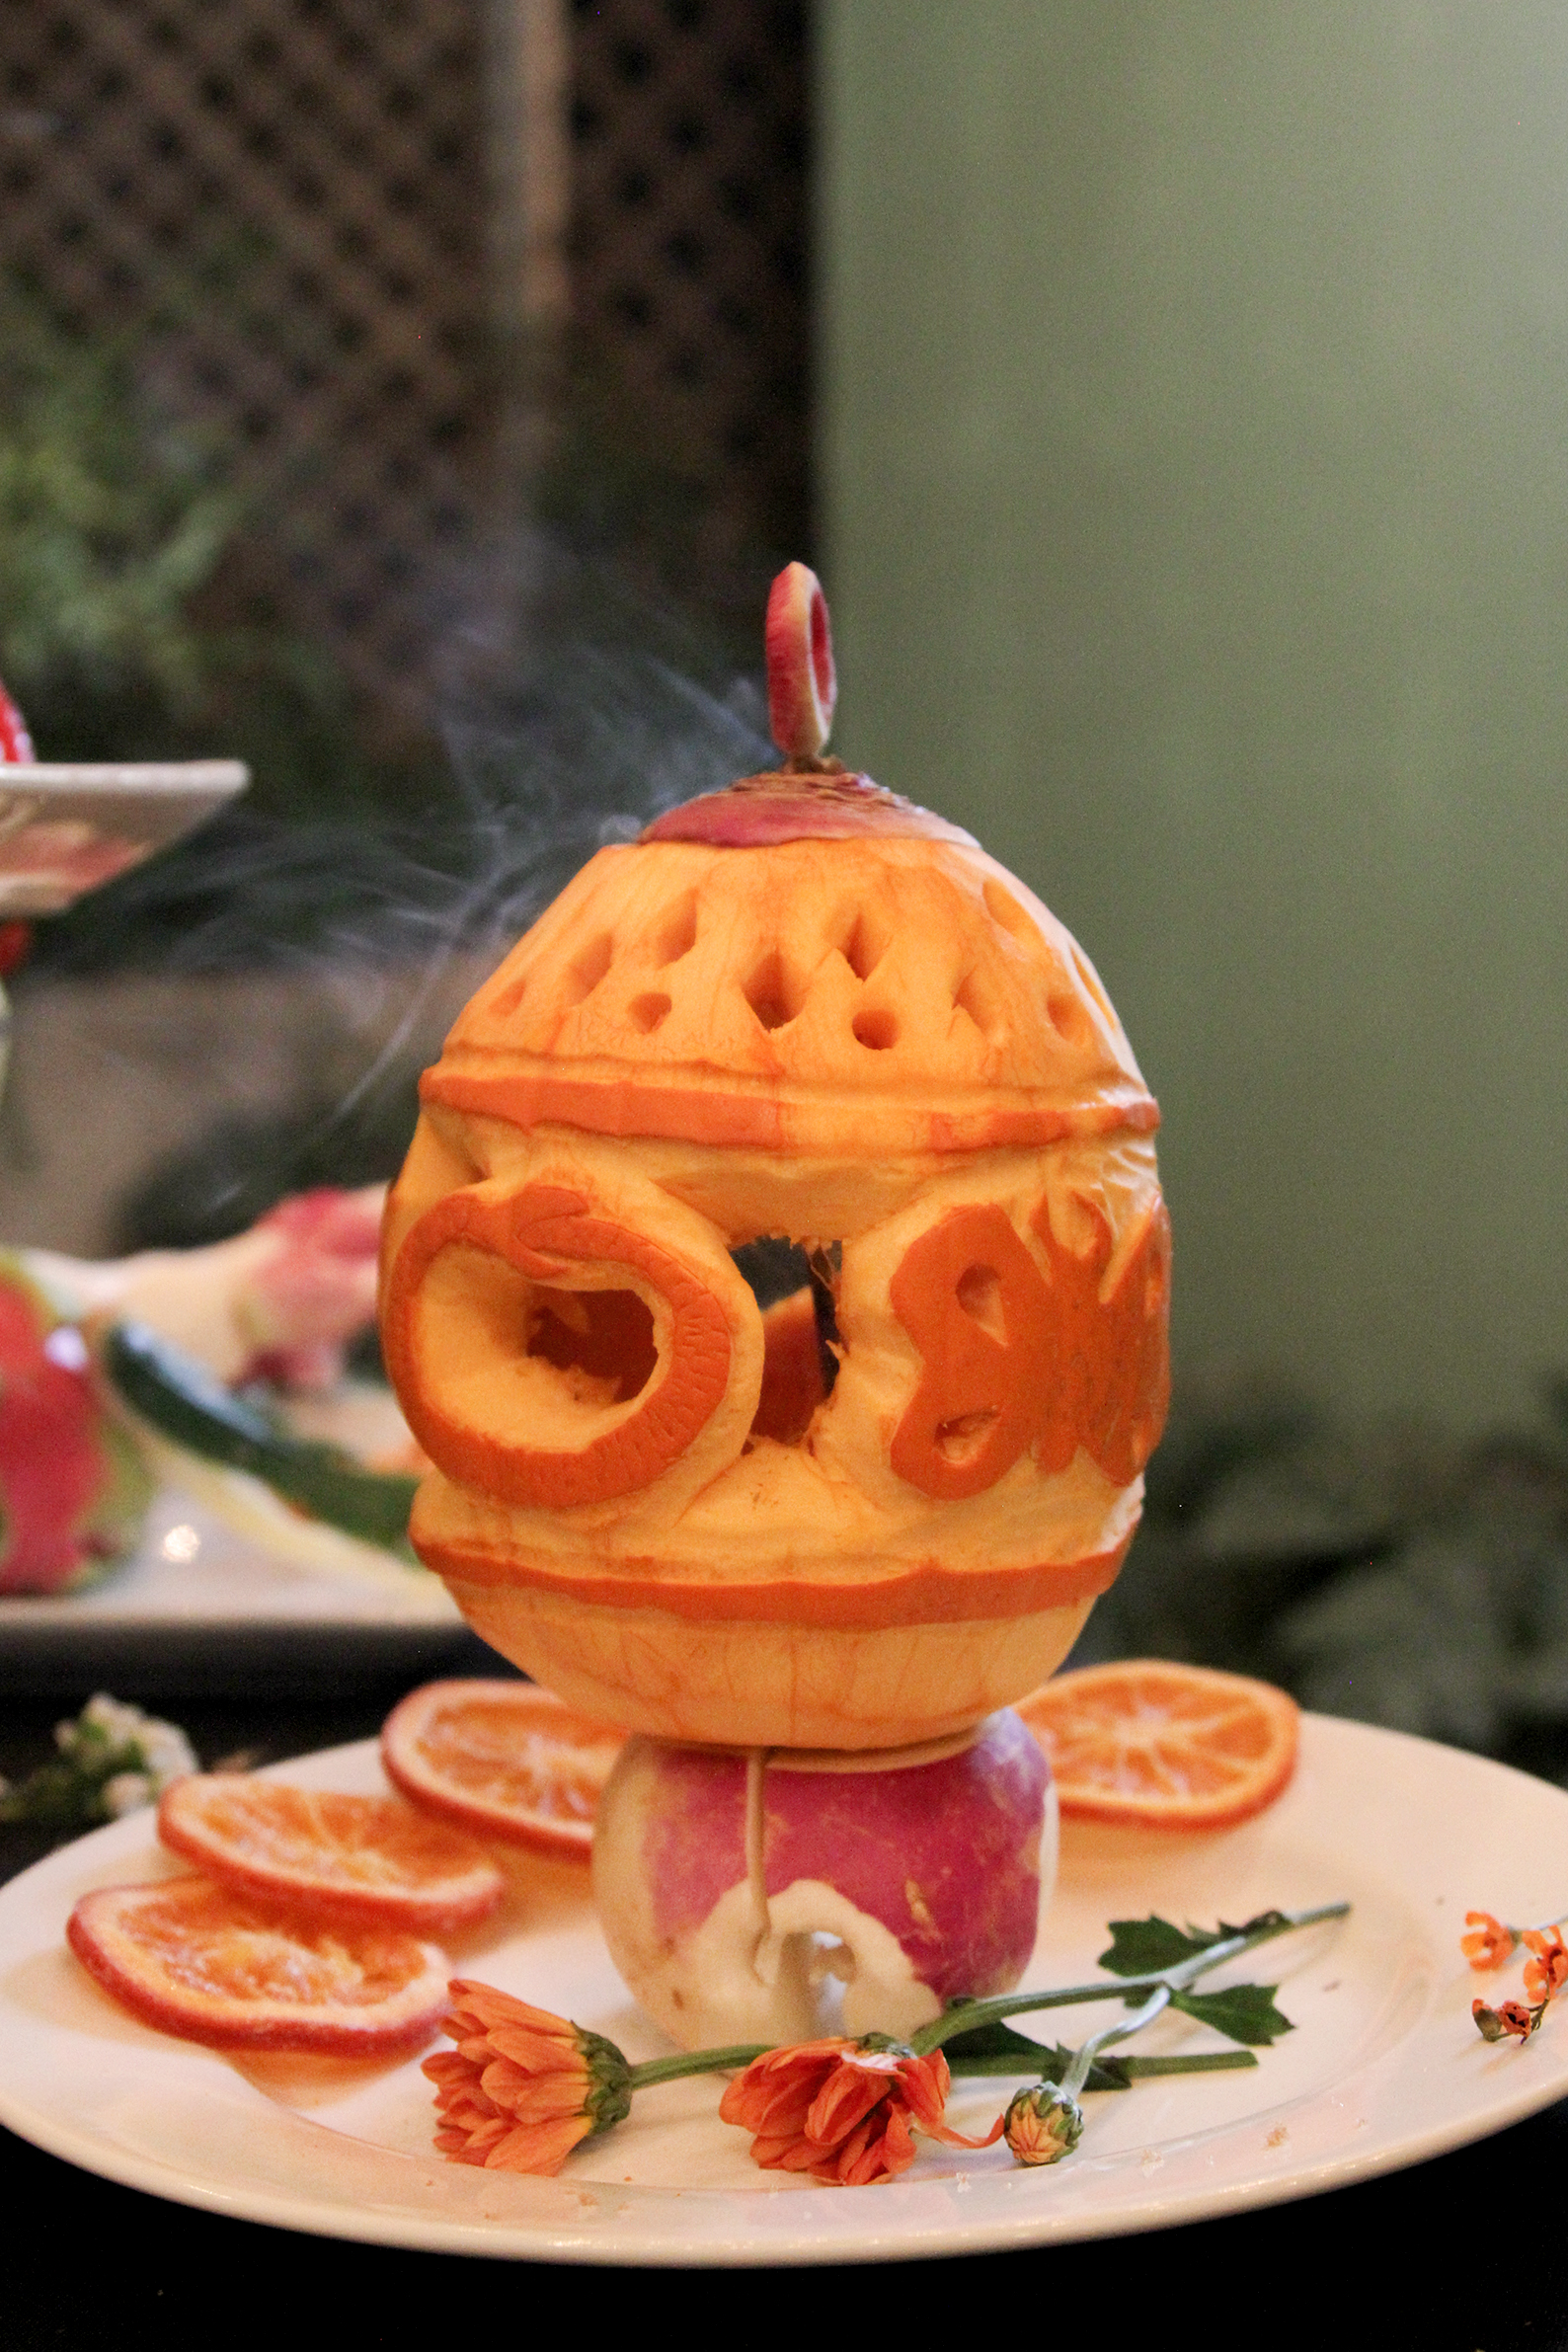 Smoke rising out of a lantern made from pumpkin on a white plate